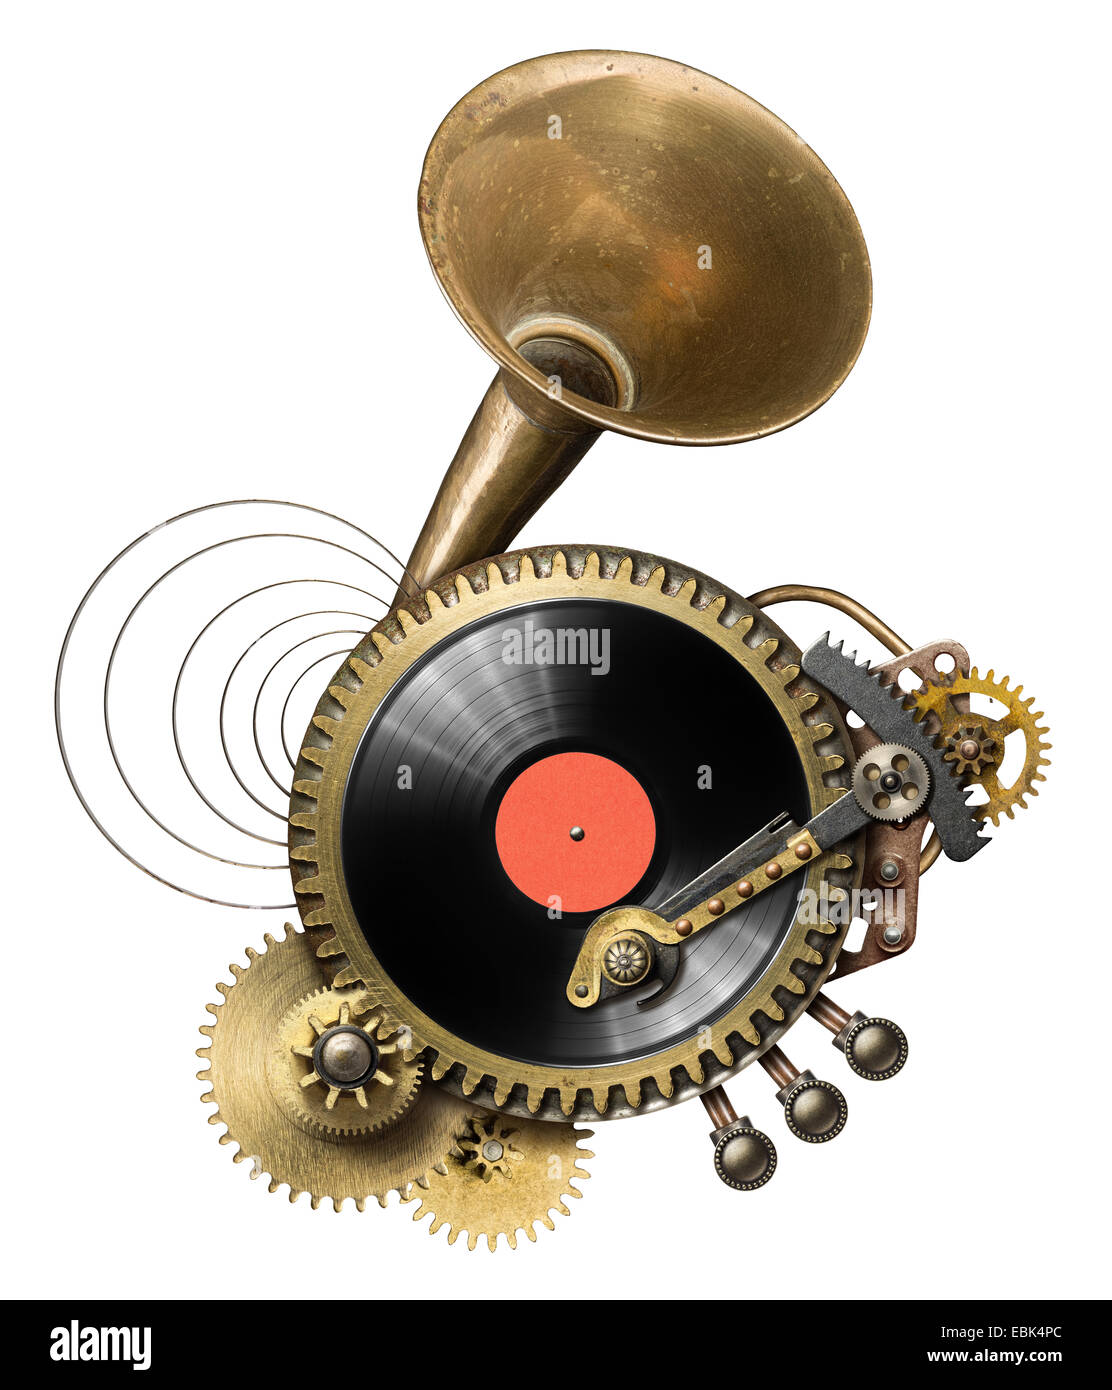 Stylized steampunk metal collage of vinyl record turntable Stock Photo